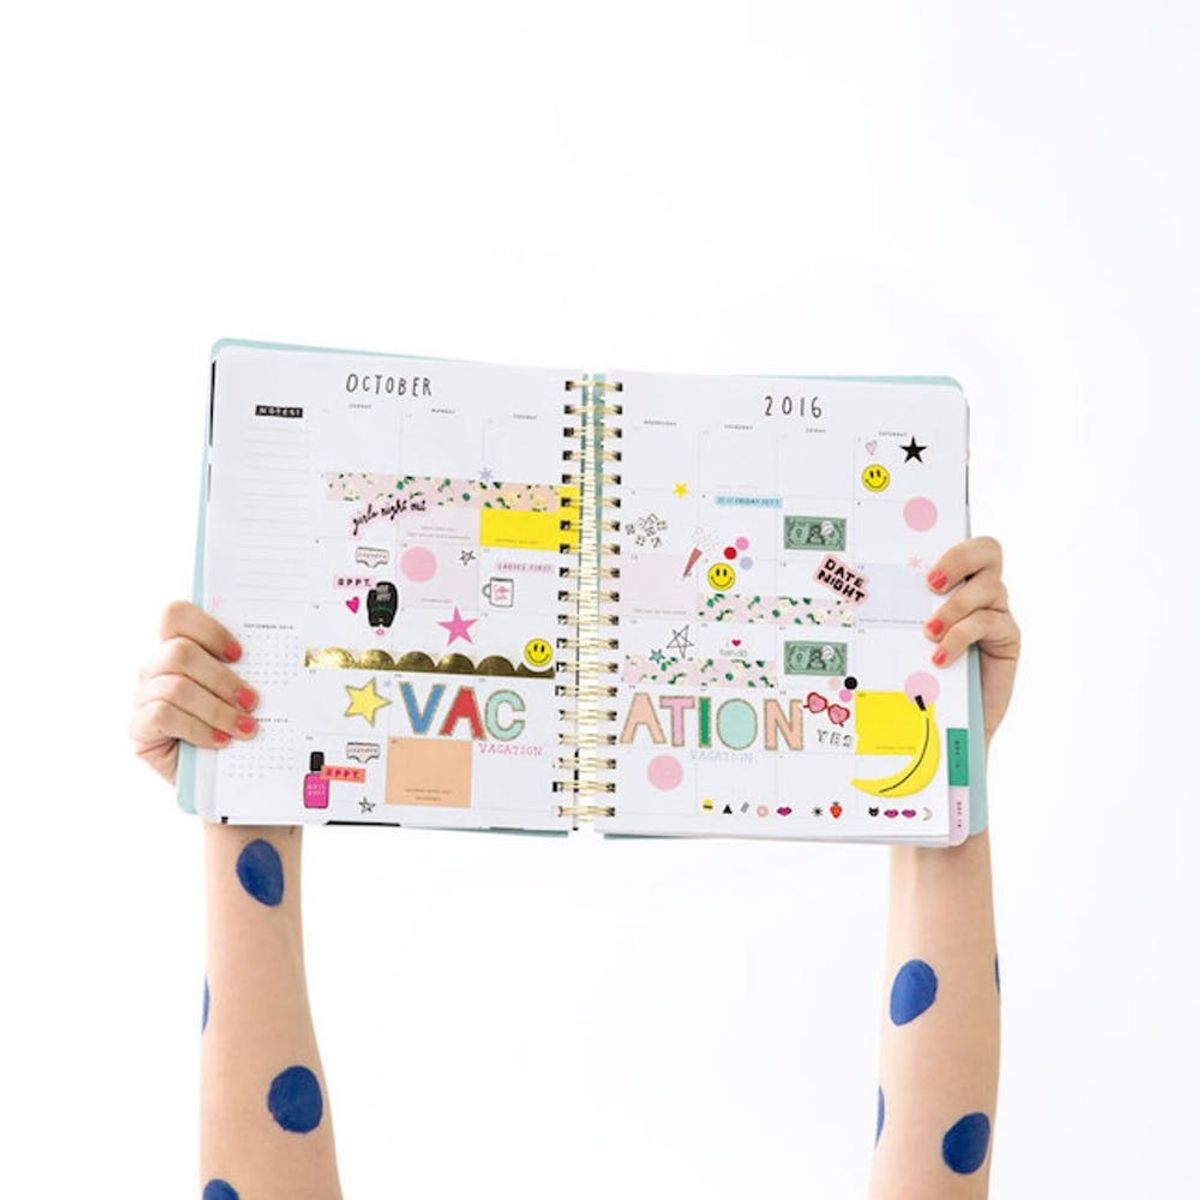 16 Creative Sticker Sets to Help You “Stick” to Your Planner Routine